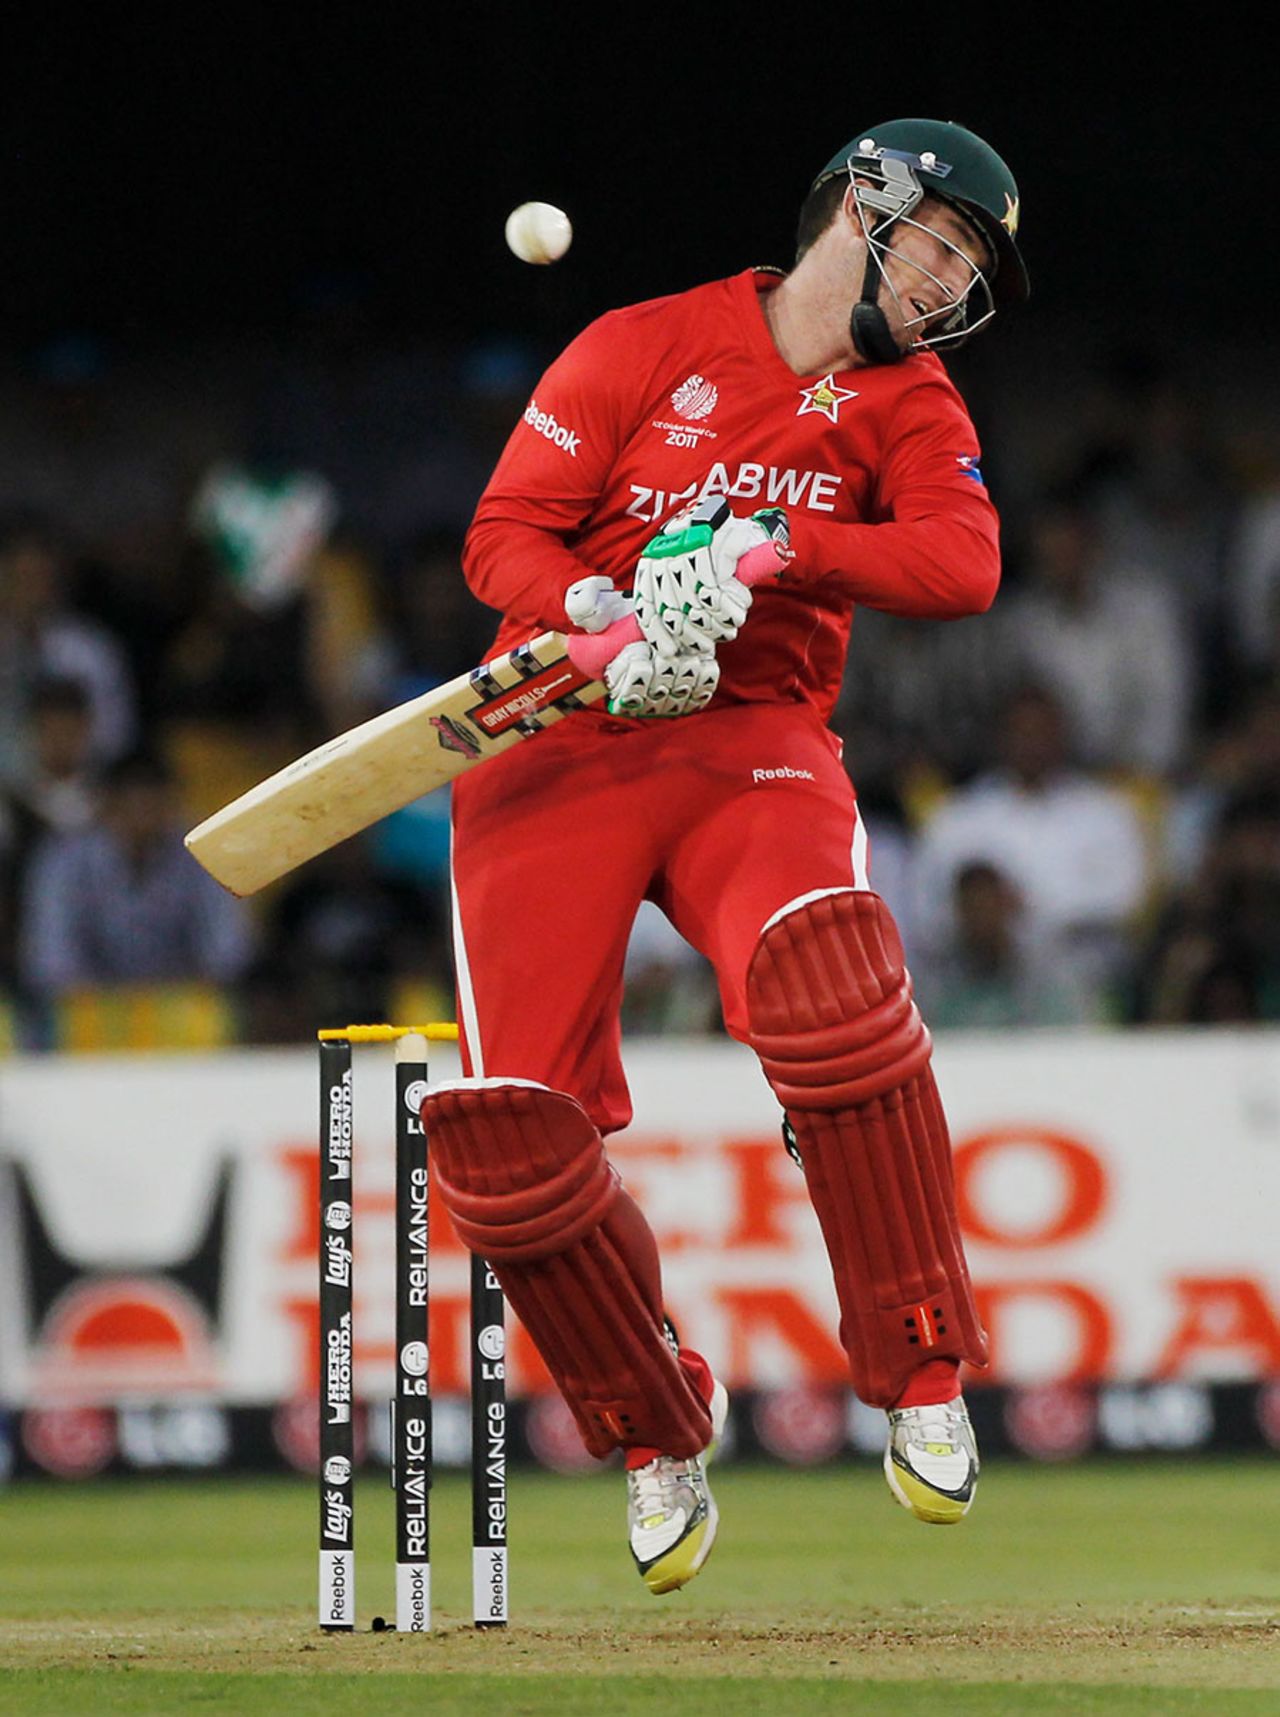 Brendan Taylor sways out of the way of a Shaun Tait bouncer, Australia v Zimbabwe, Group A, World Cup 2011, Ahmedabad, February 21, 2011